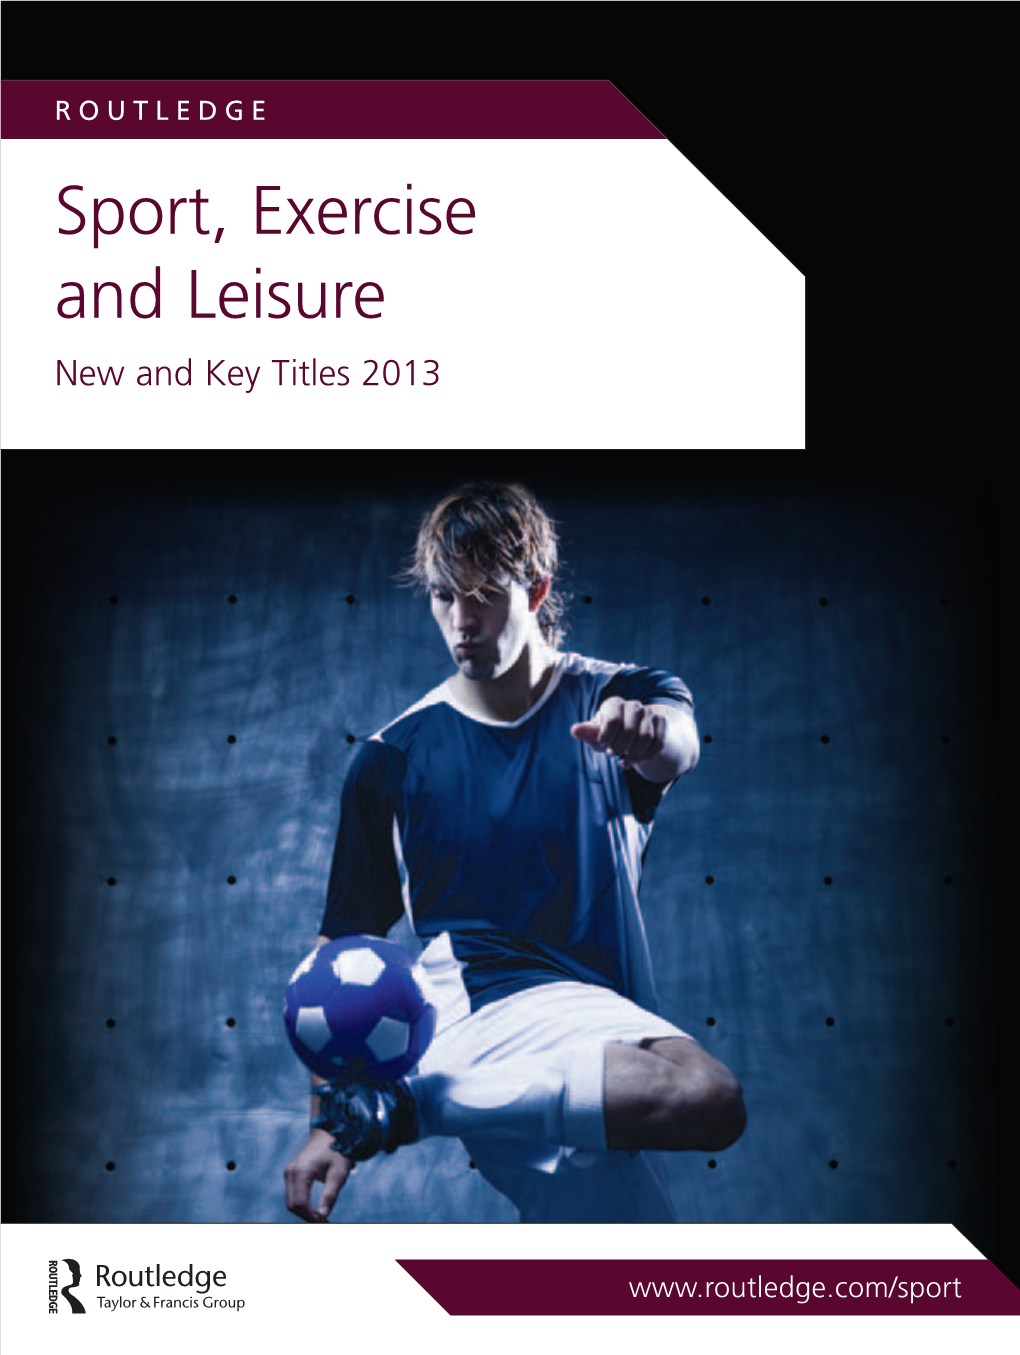 Sport, Exercise and Leisure New and Key Titles 2013